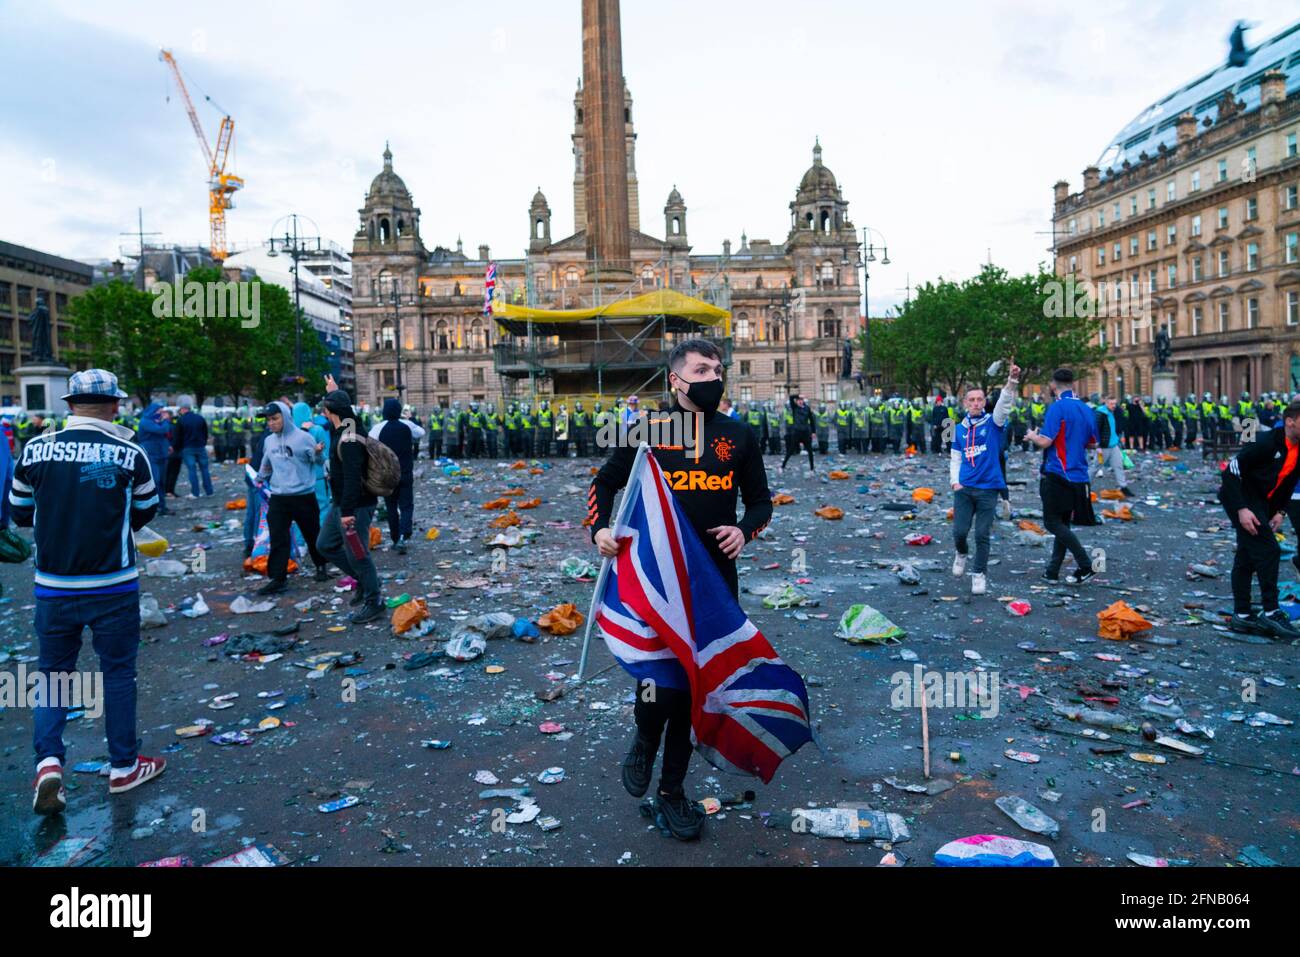 Glasgow, Scotland, UK. 15 May 202. Rangers football supporters  celebrating 55th league victory are cleared from George Square by police in riot gear on Saturday evening. In very violent scenes police were pelted with bottles and items from a nearby construction site as police pushed the supporters into the south west corner of the square.  Iain Masterton/Alamy Live News. Stock Photo